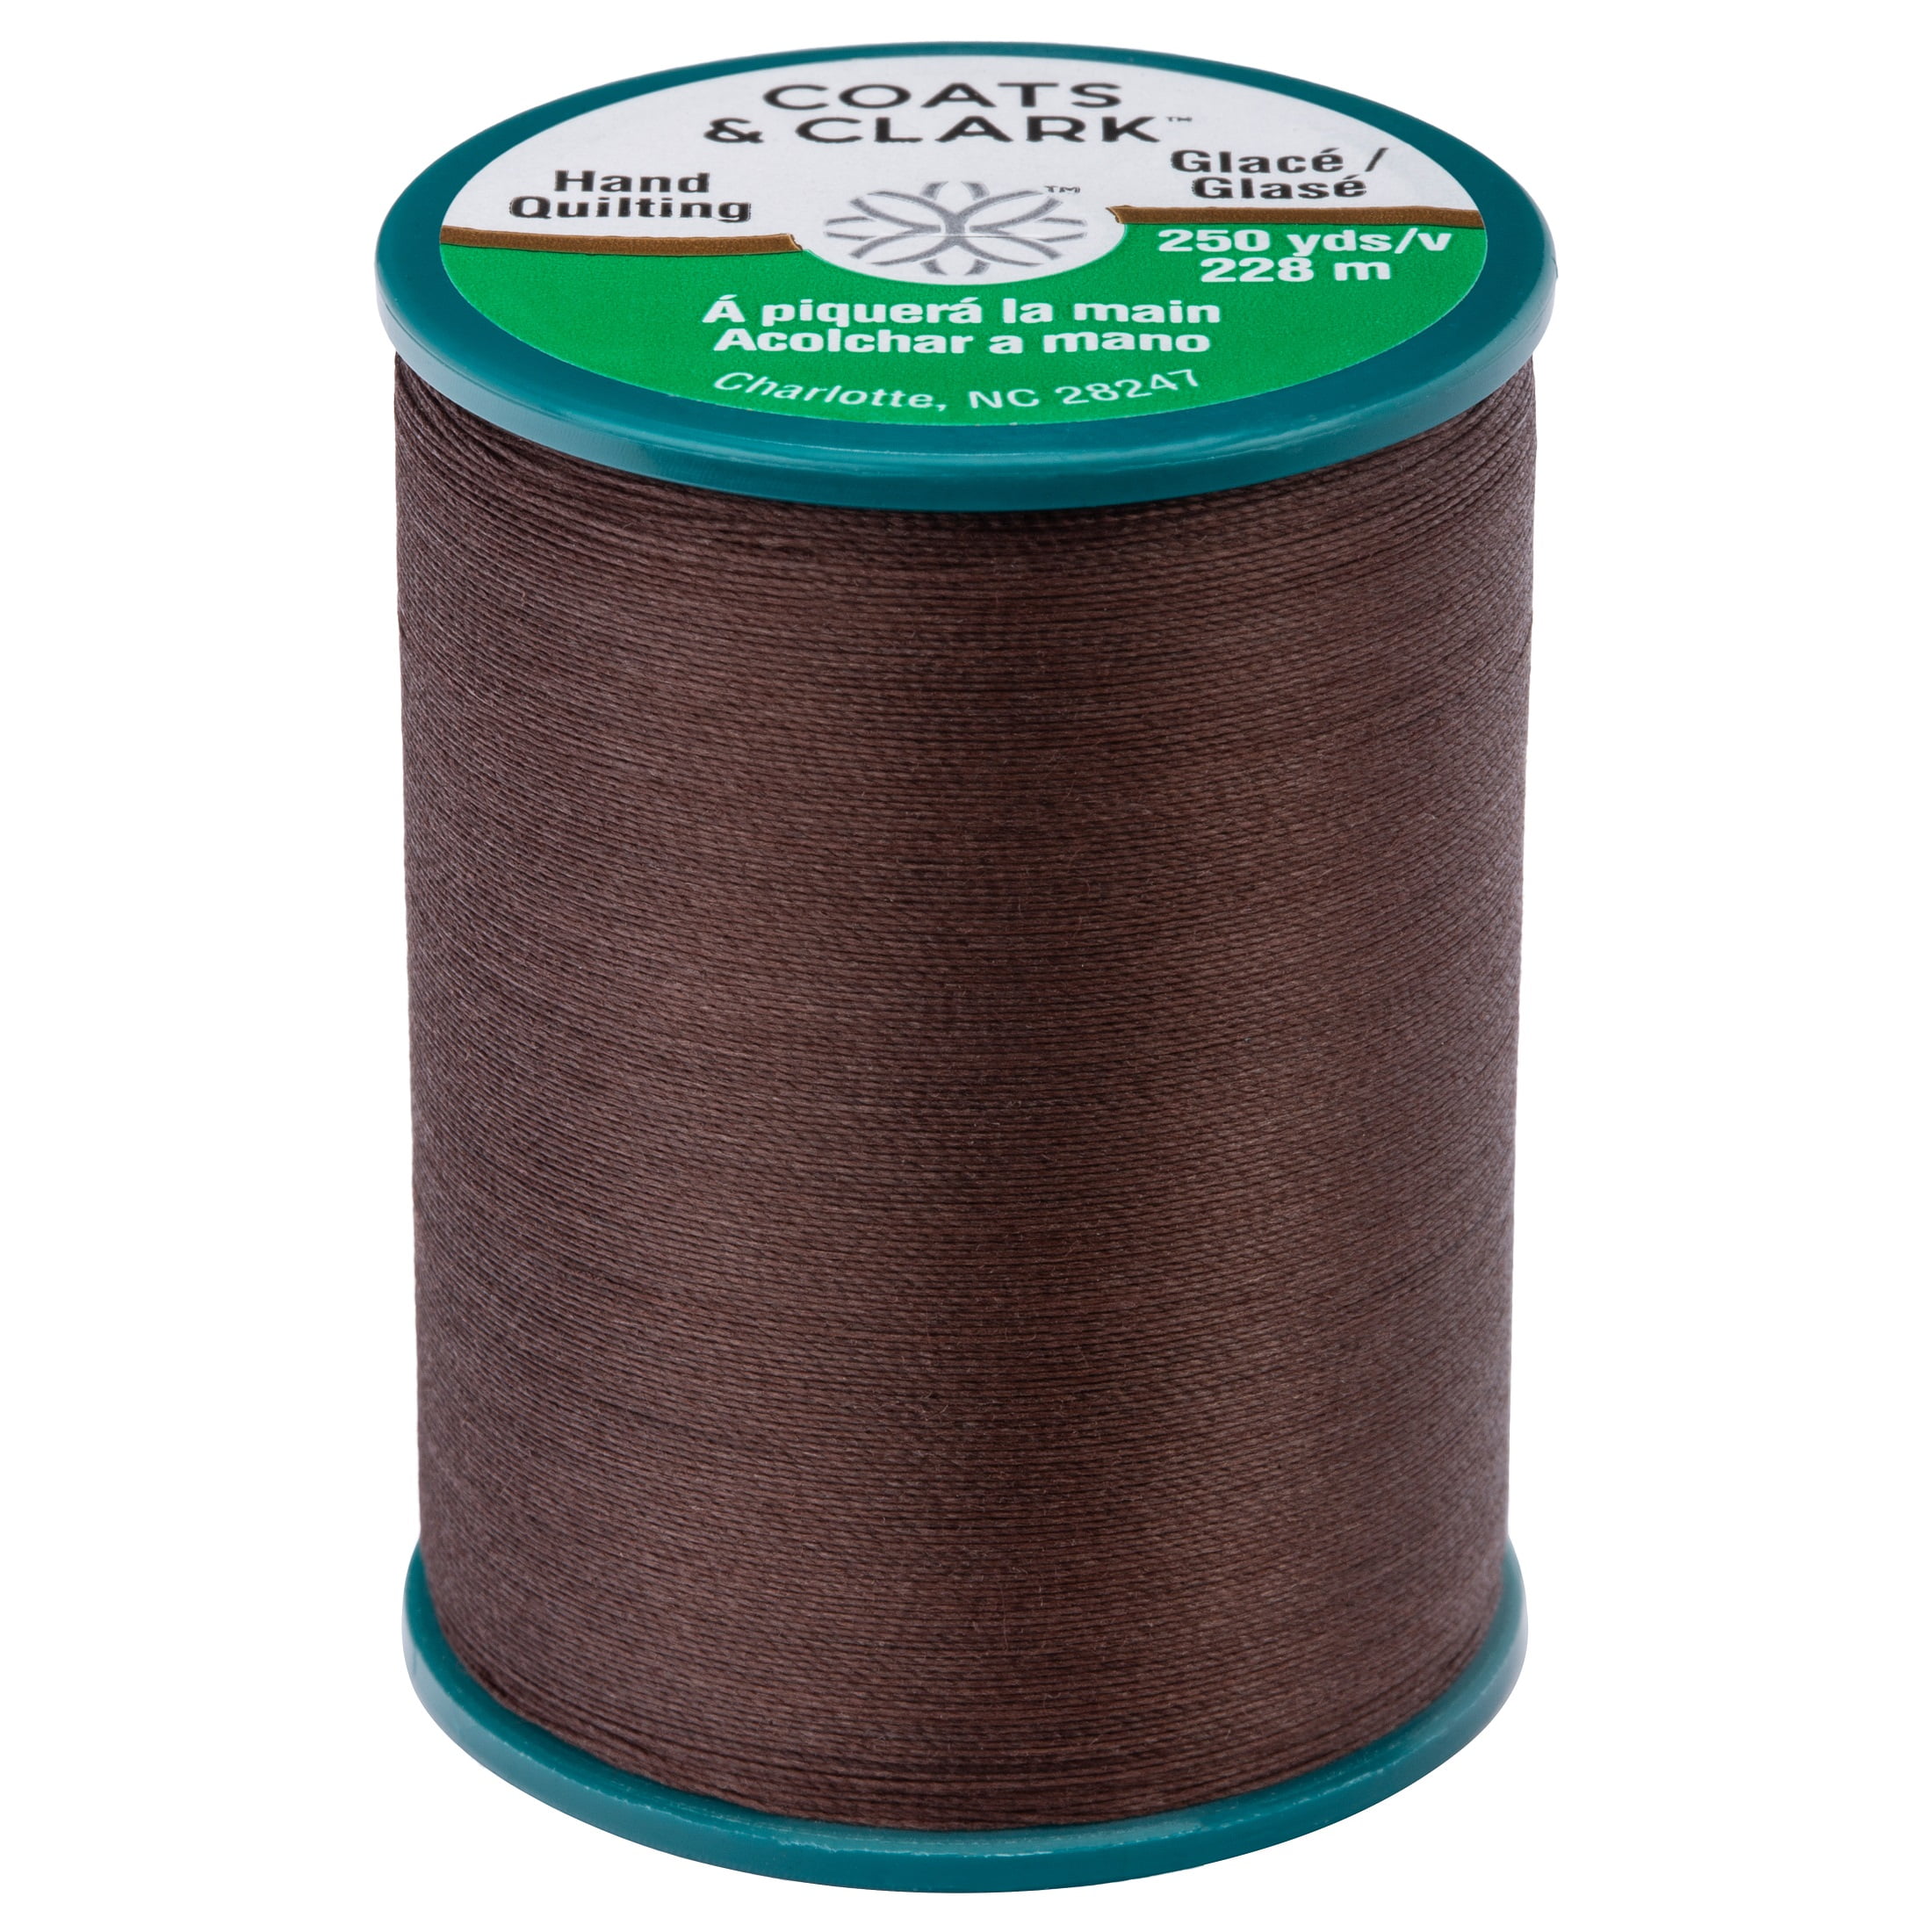 Coats & Clark Dual Duty Hand Quilting Chona Brown Cotton/Polyester Thread, 250 Yards